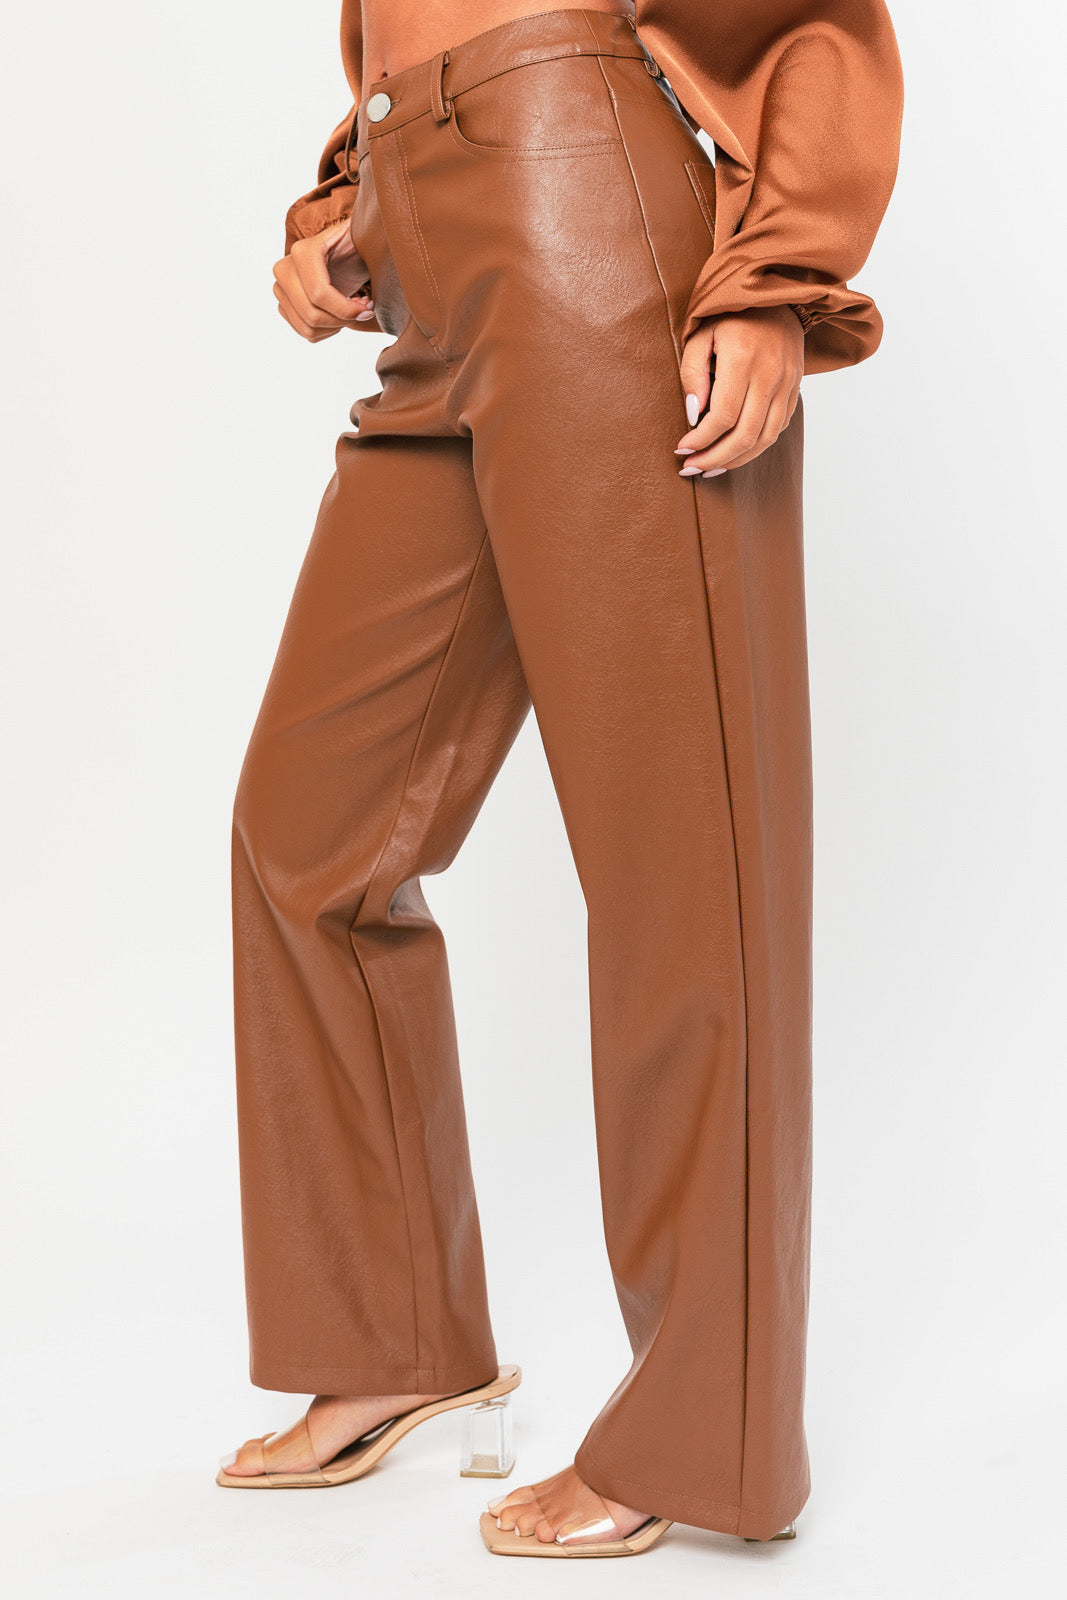 HDE Women's Faux Leather Pants High Waisted Trousers with Pockets Camel  Brown - XL - Walmart.com